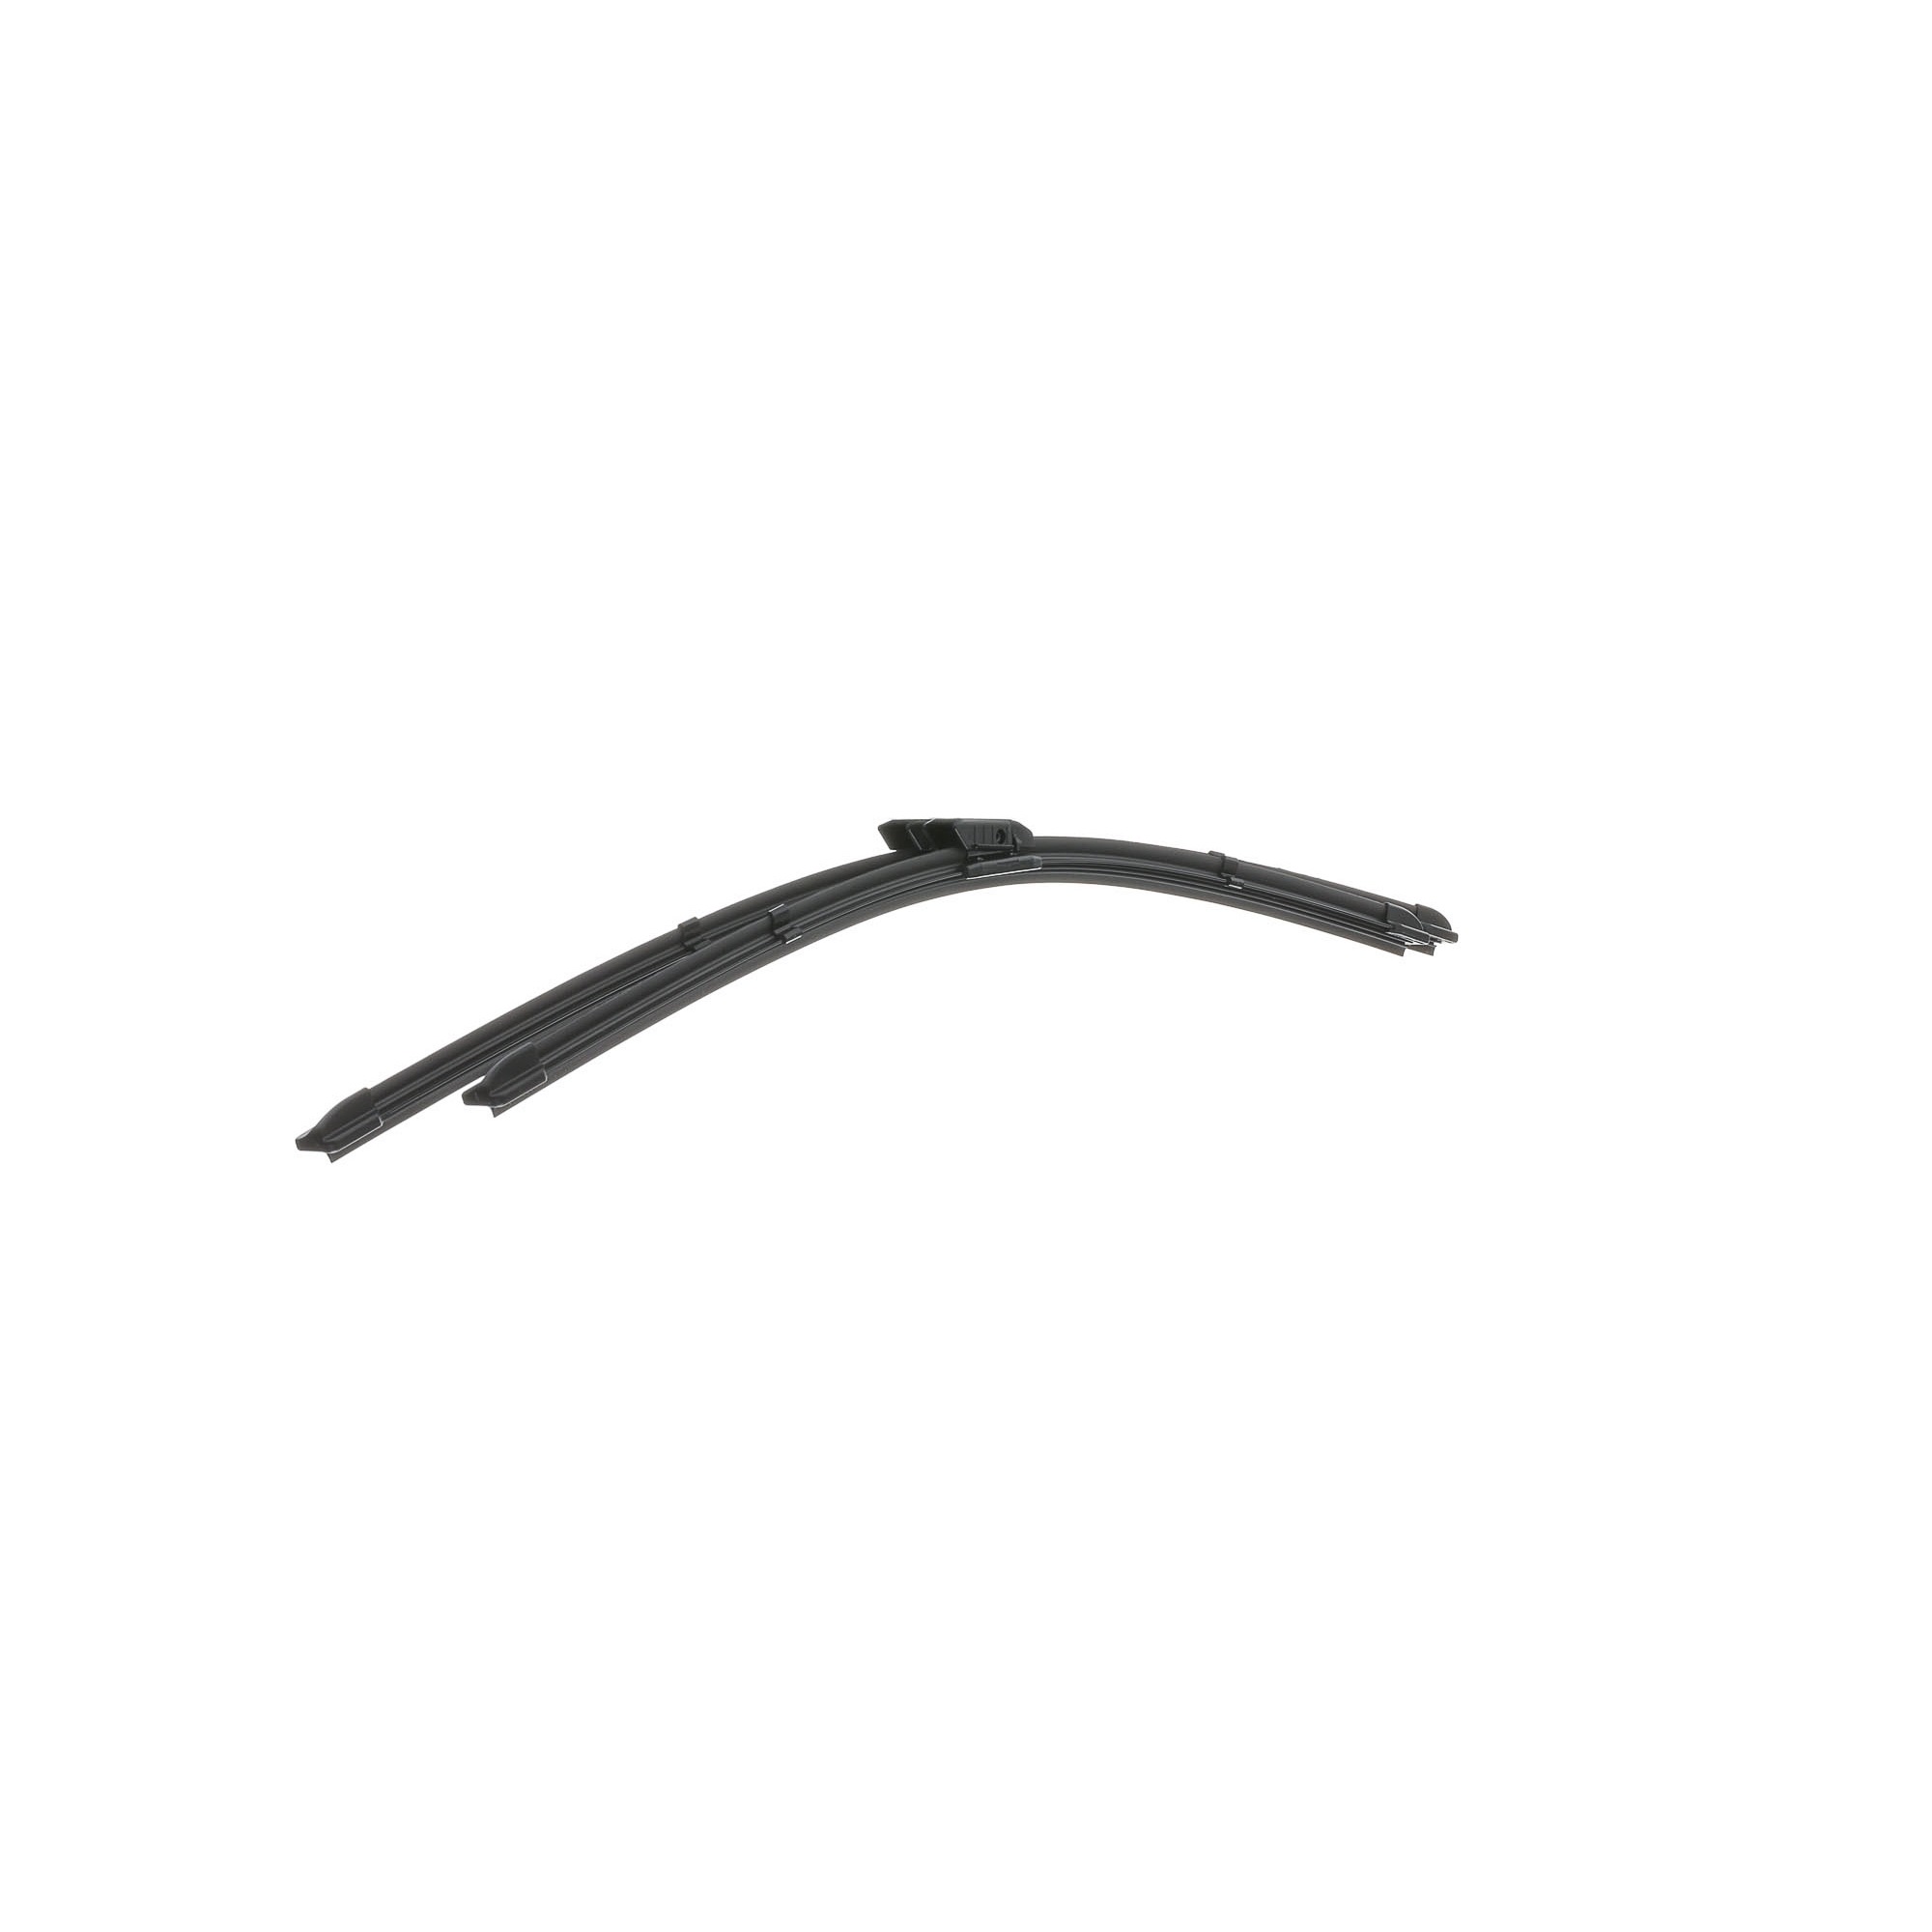 RIDEX 298W0372 Wiper blade 600, 500 mm Front, Flat wiper blade, Beam, for left-hand drive vehicles